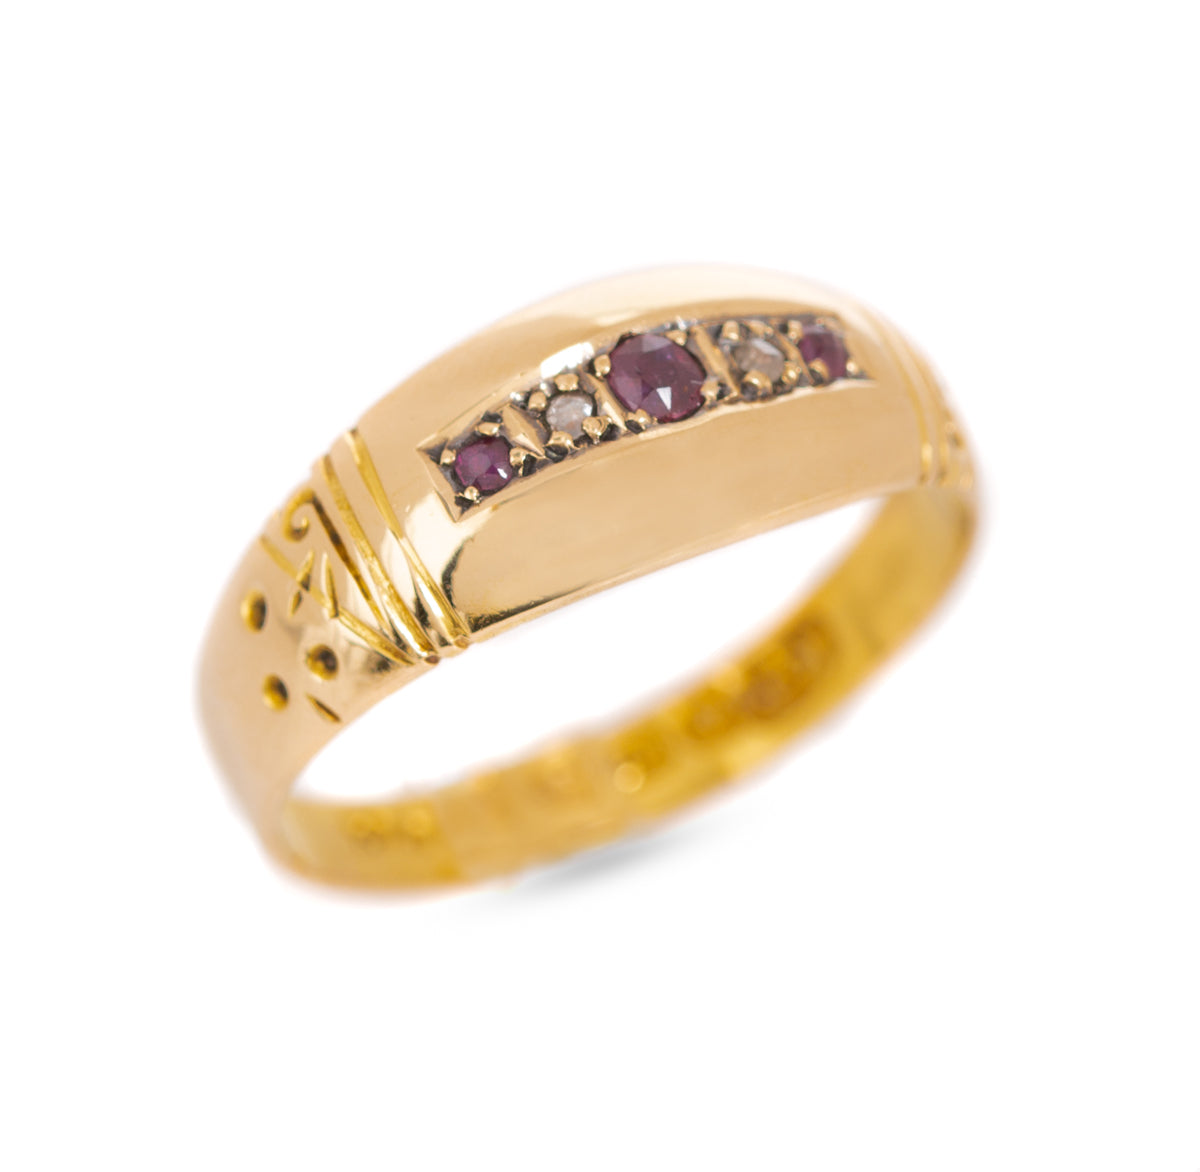 Antique Edwardian 18ct Gold Natural Ruby & Diamond 5 Stone Ring / Band UK Size N (Code A1109)